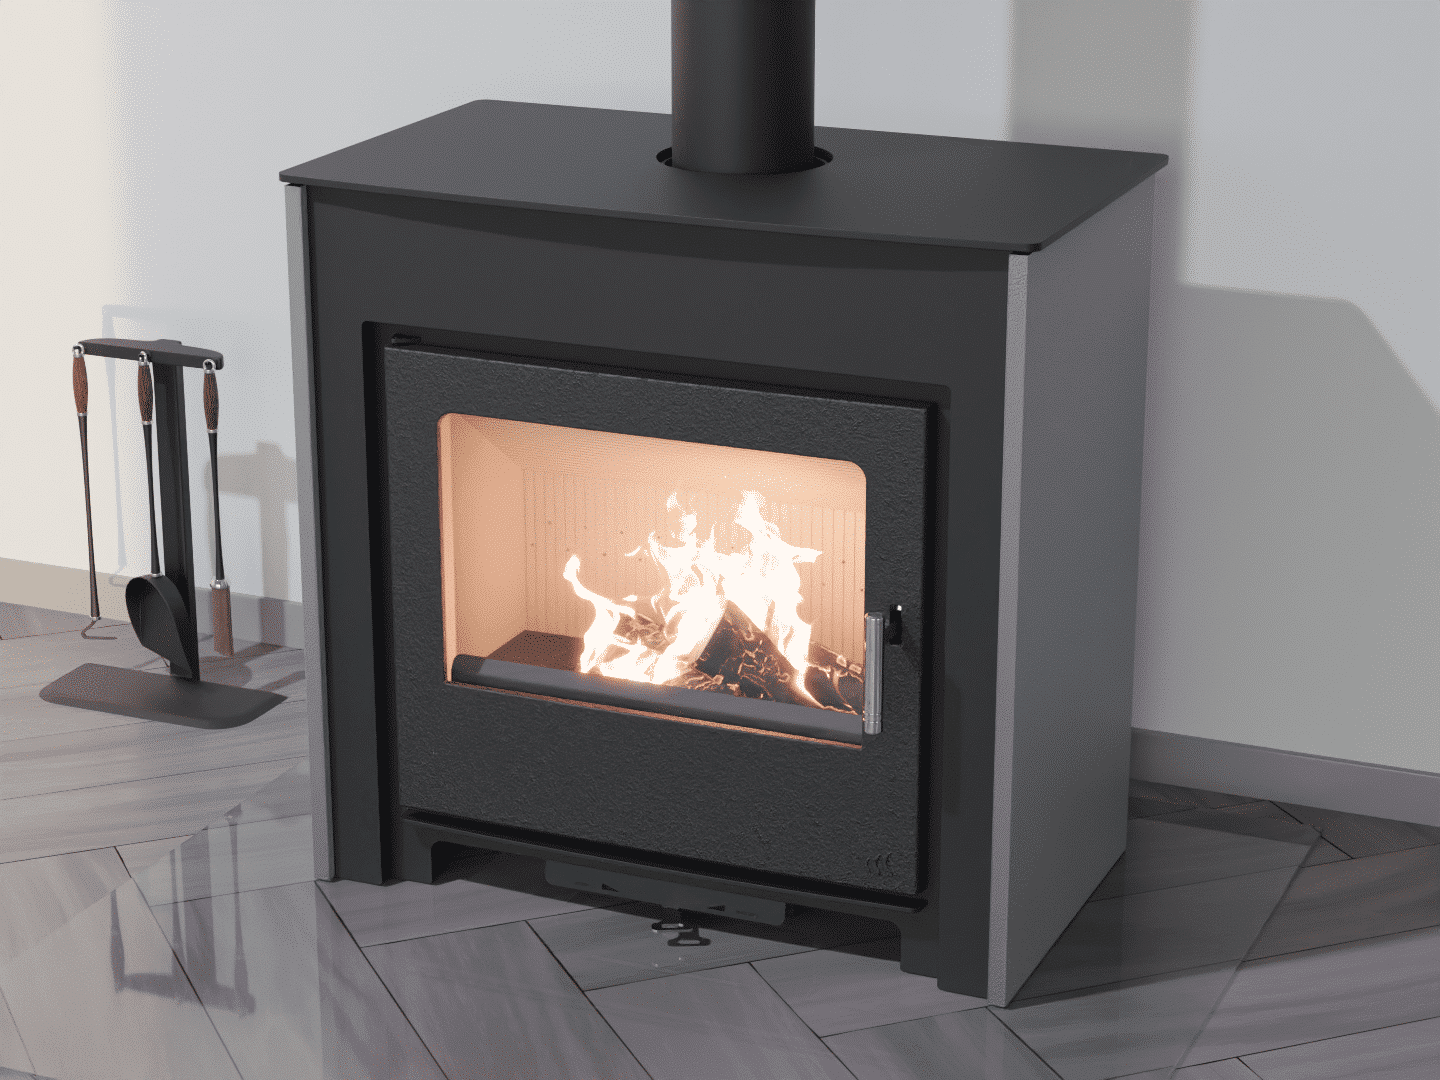 2101_Fireplace stove with heat exchanger_White aluminium